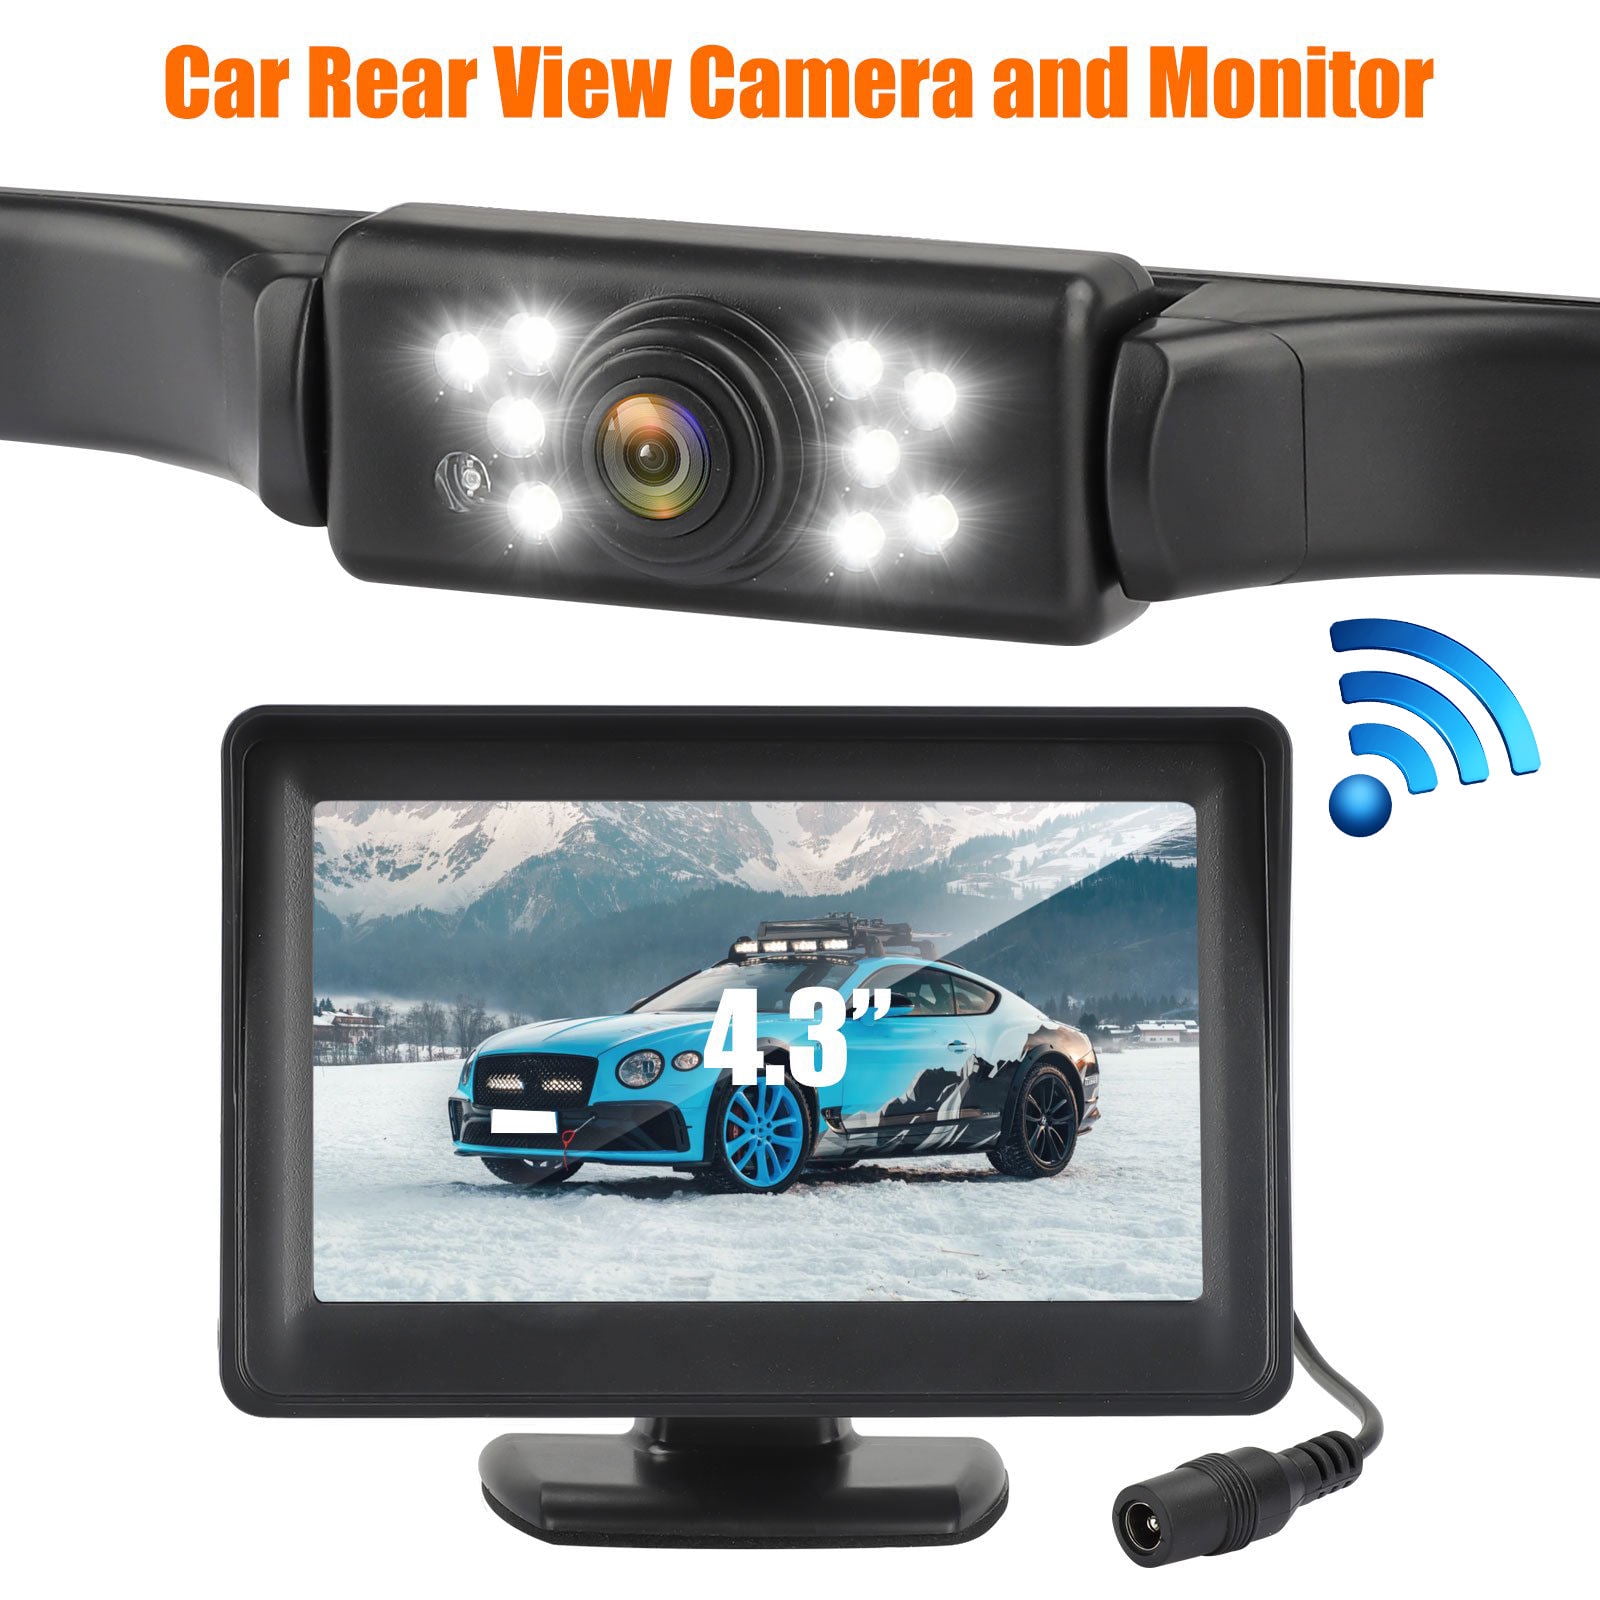 7 HD Monitor Reversing +2 Rear View 170° Wide Angel Night Vision Waterproof,18 Infrared Lights Camera Fit for Trucks/RV/Van/Campers/Vehicles YEDDY 12-24V Dual Backup Camera with Monitor Kit System